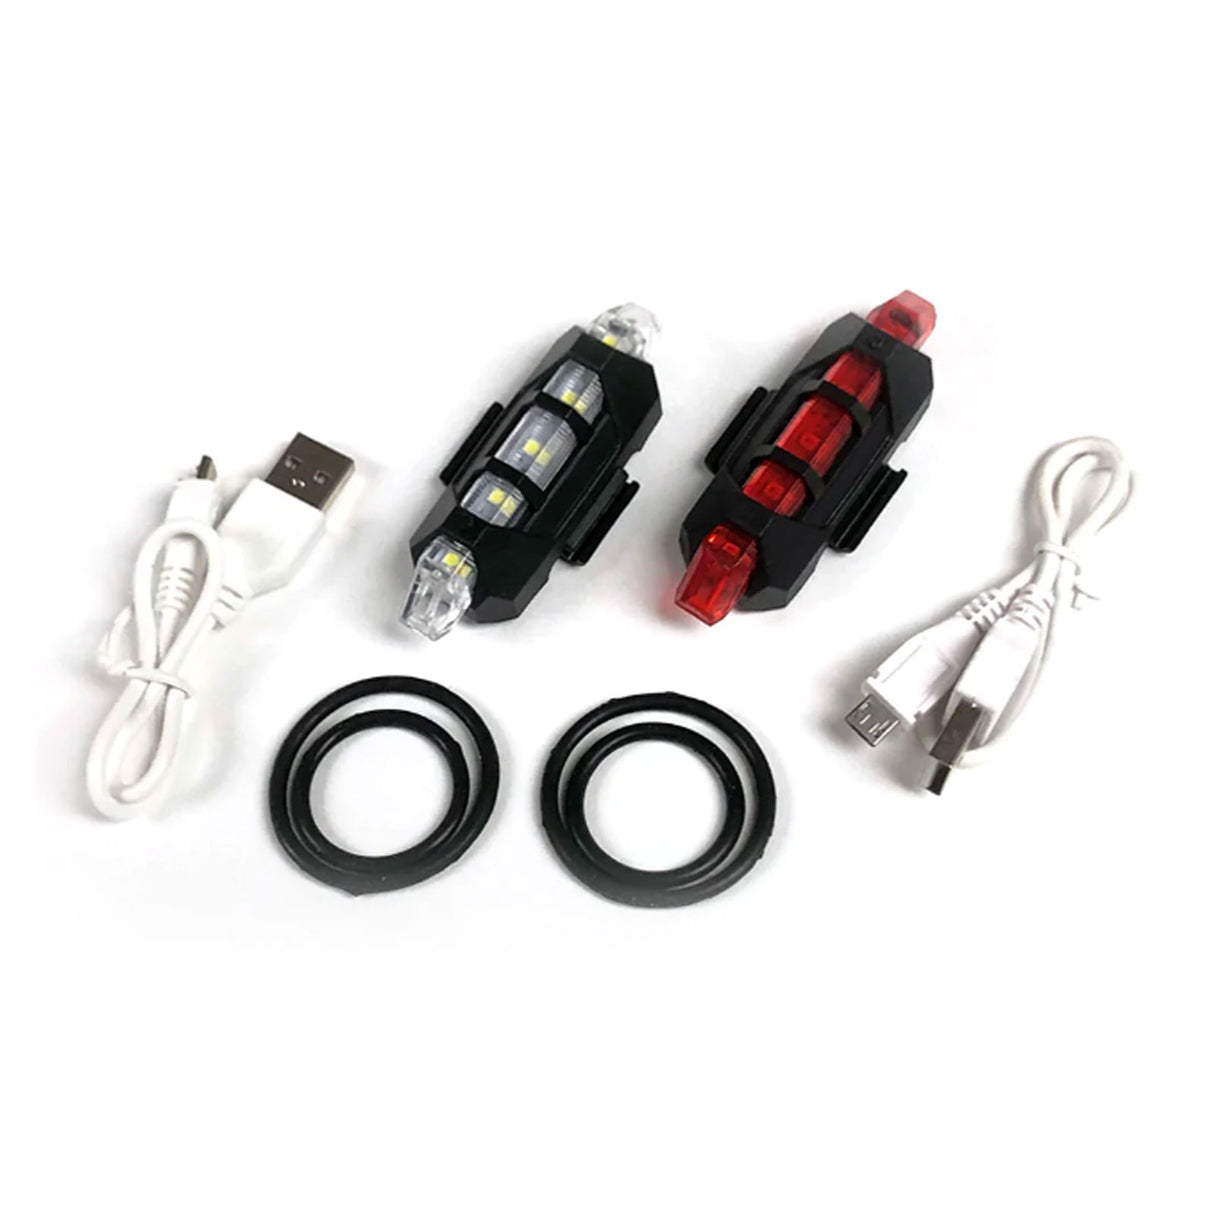 JackRabbit LED Front and Rear Light Outdoor - Transportation - The Heel Shoe Fitters